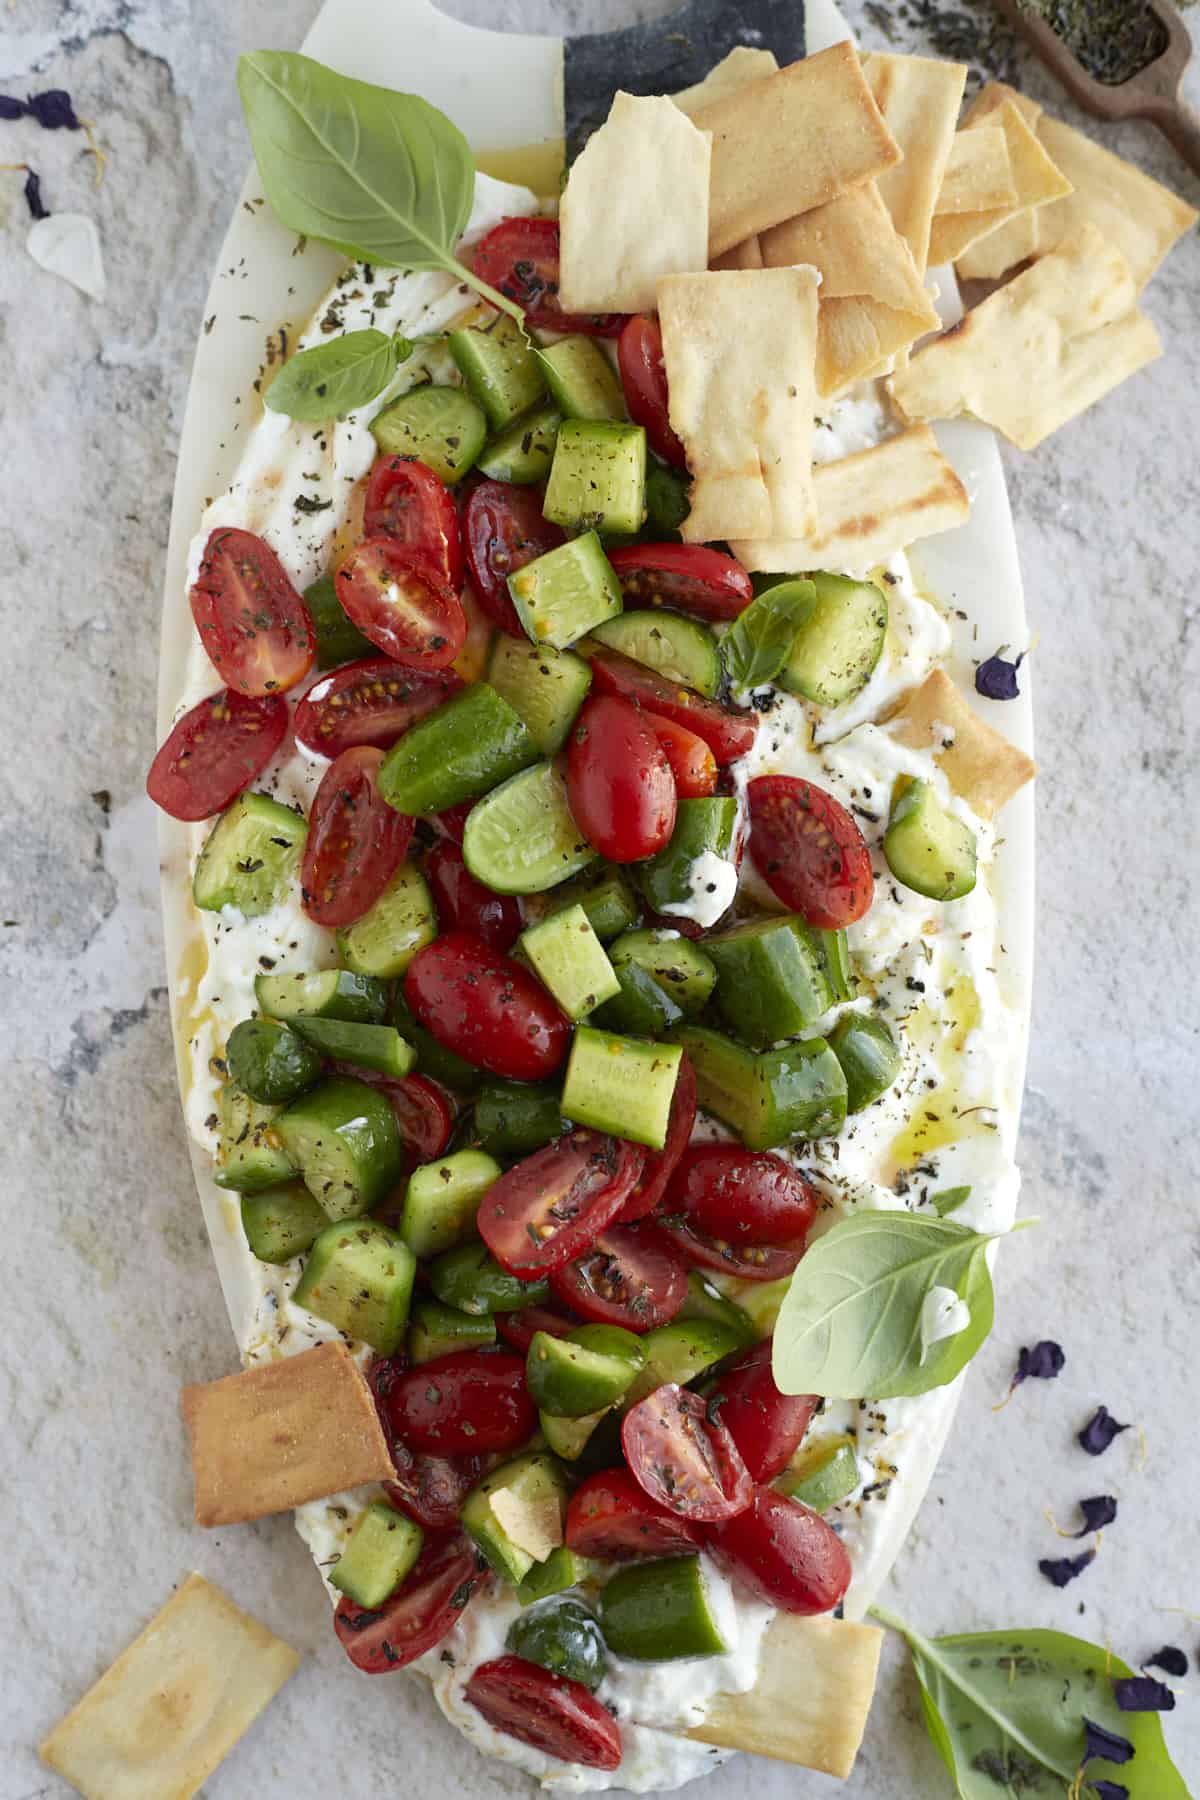 whipped feta topped with tomato and cucumber salad with pita chips on the side